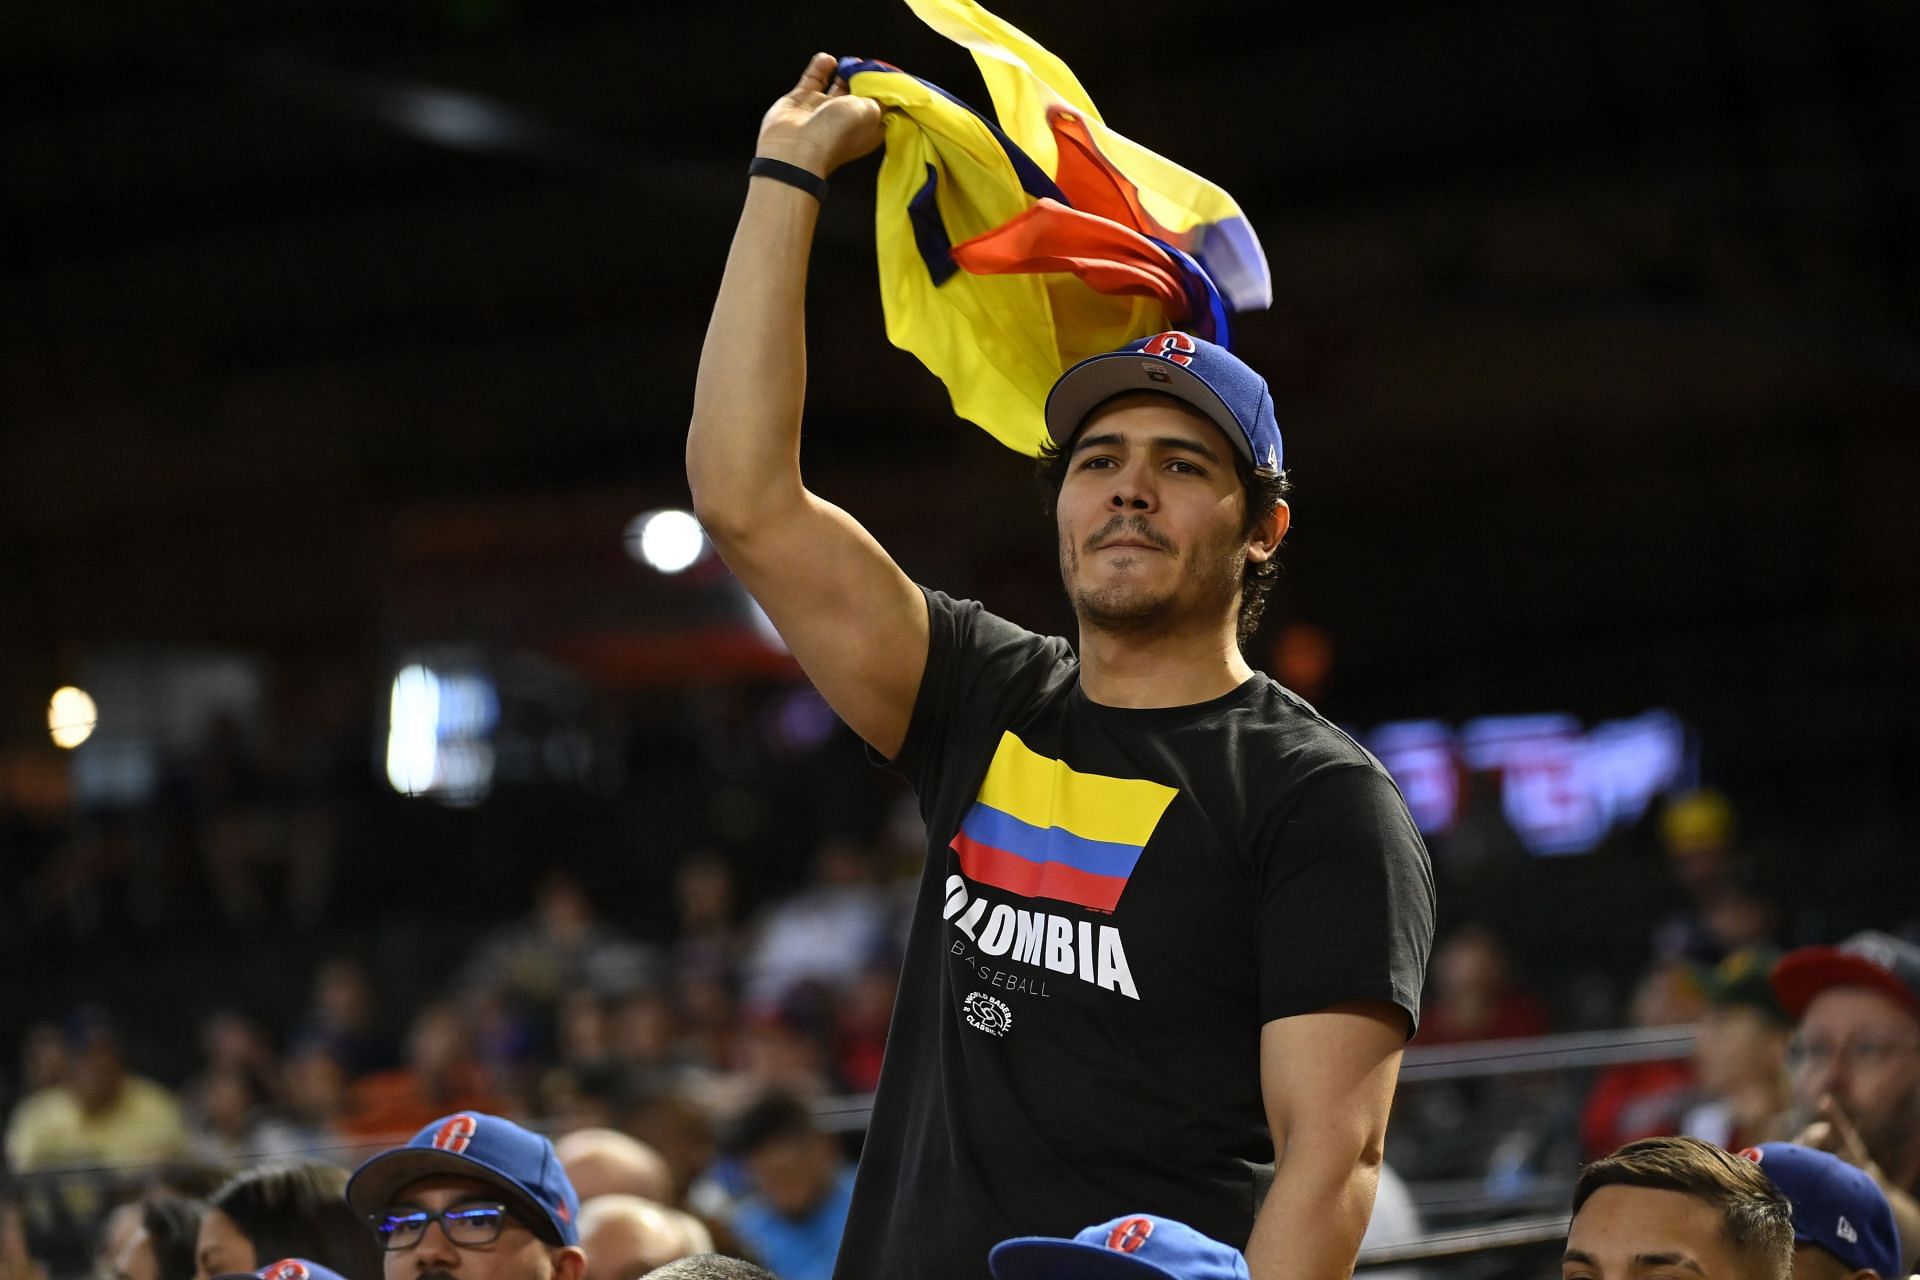 A fan at Colombia vs. Great Britain